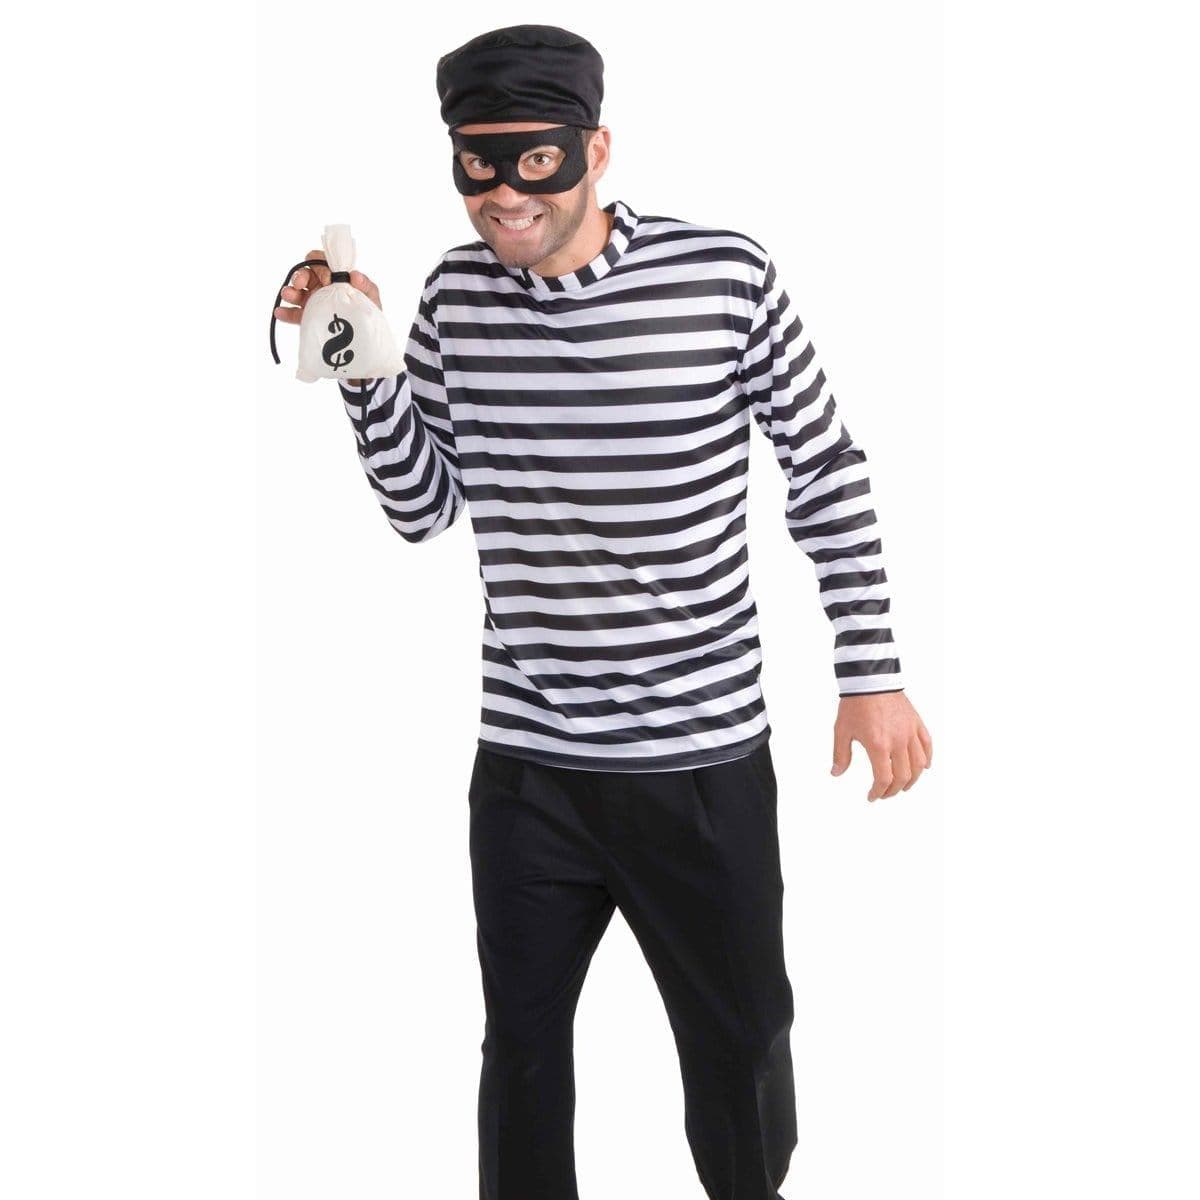 Buy Costumes Co-Burglar Costume for Adults sold at Party Expert